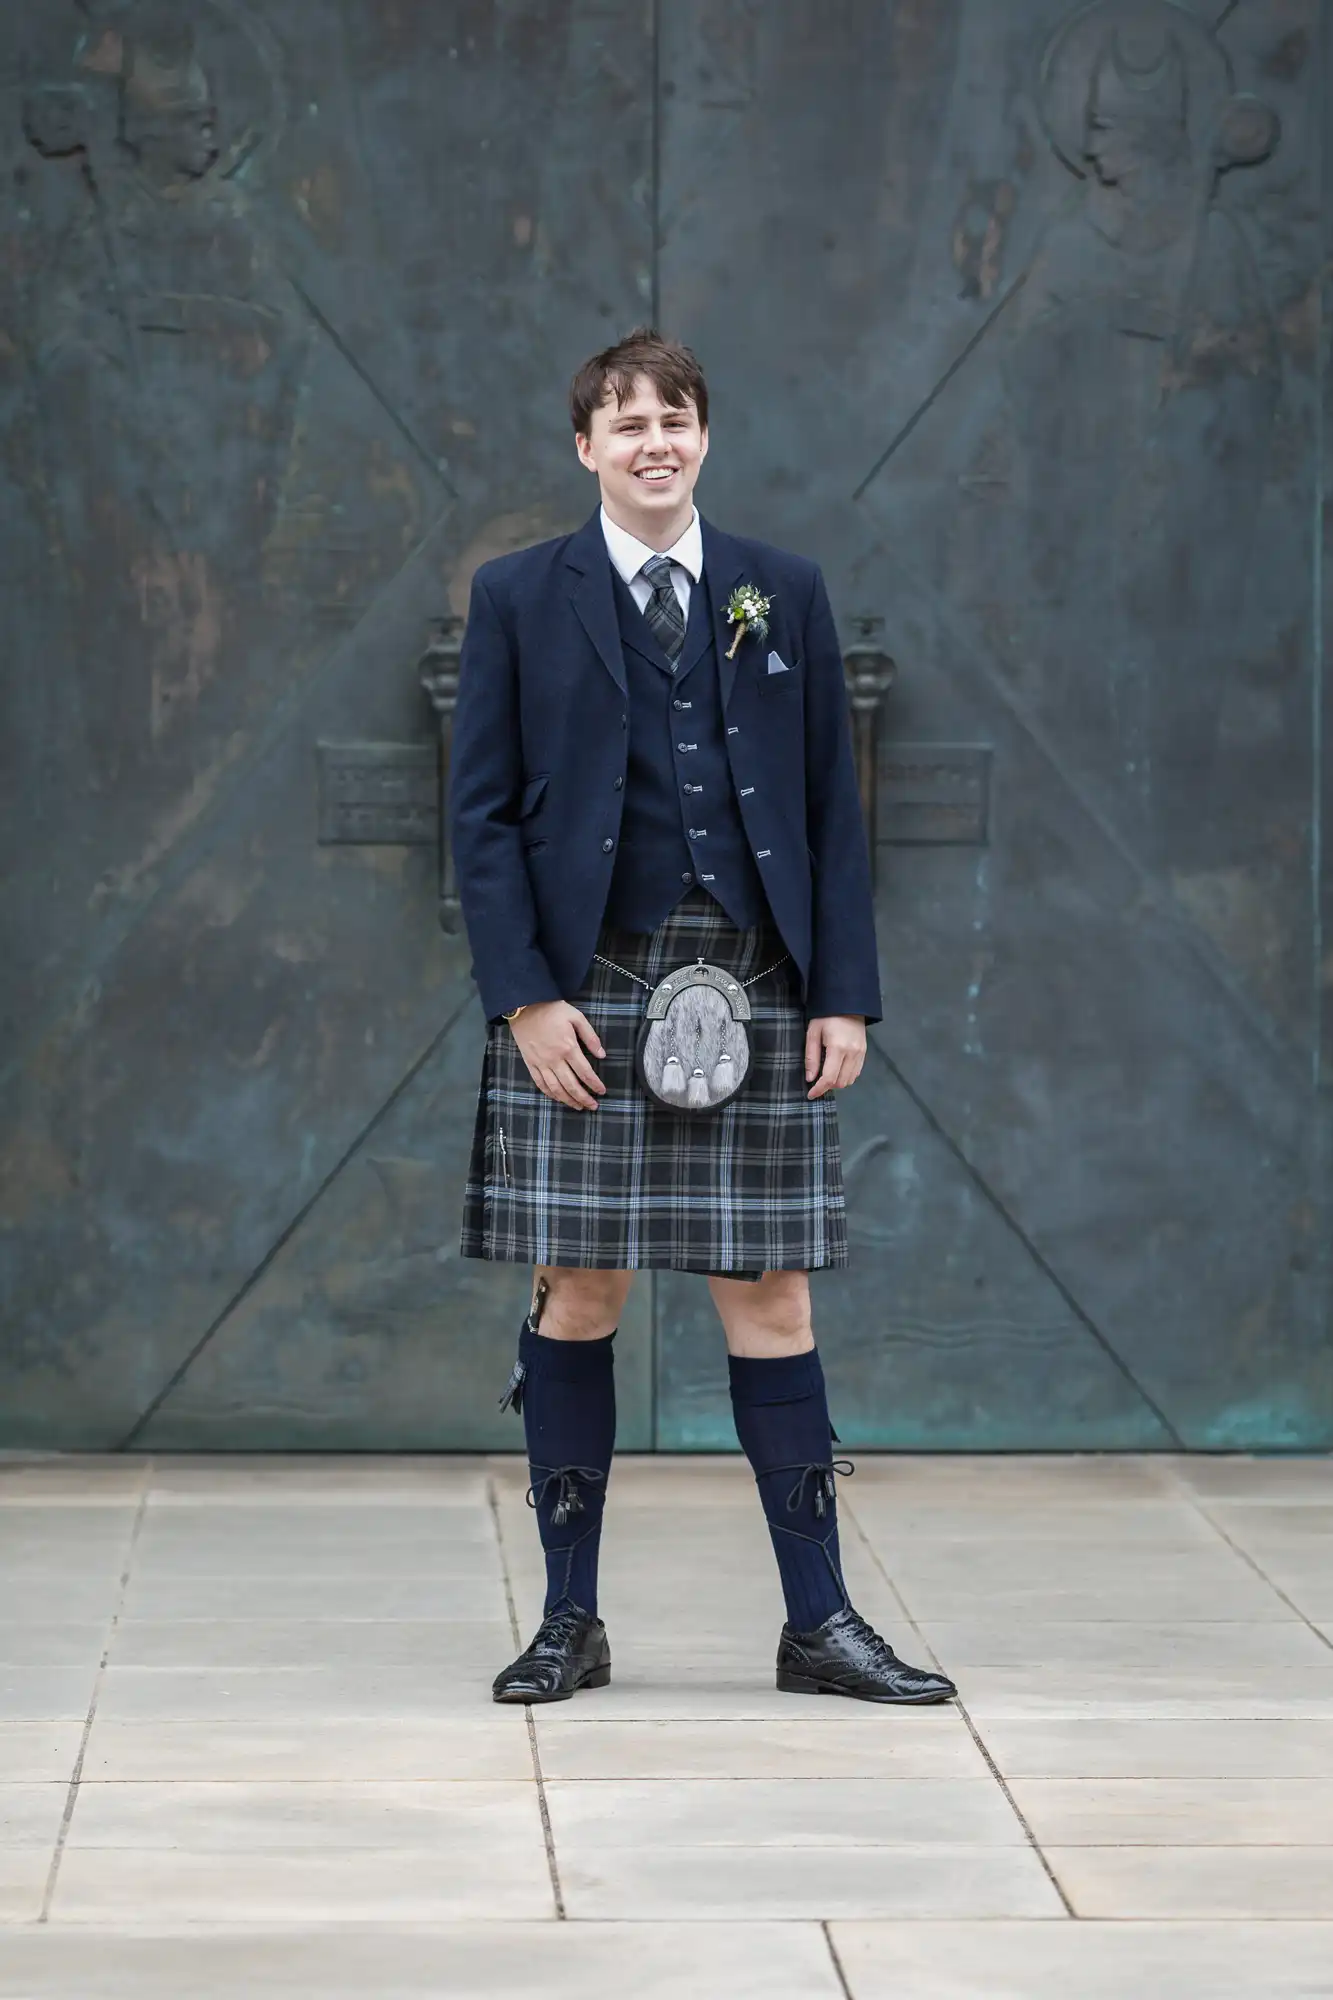 A young man in formal attire with a kilt, smiling and standing before a wall with bas-relief sculptures.